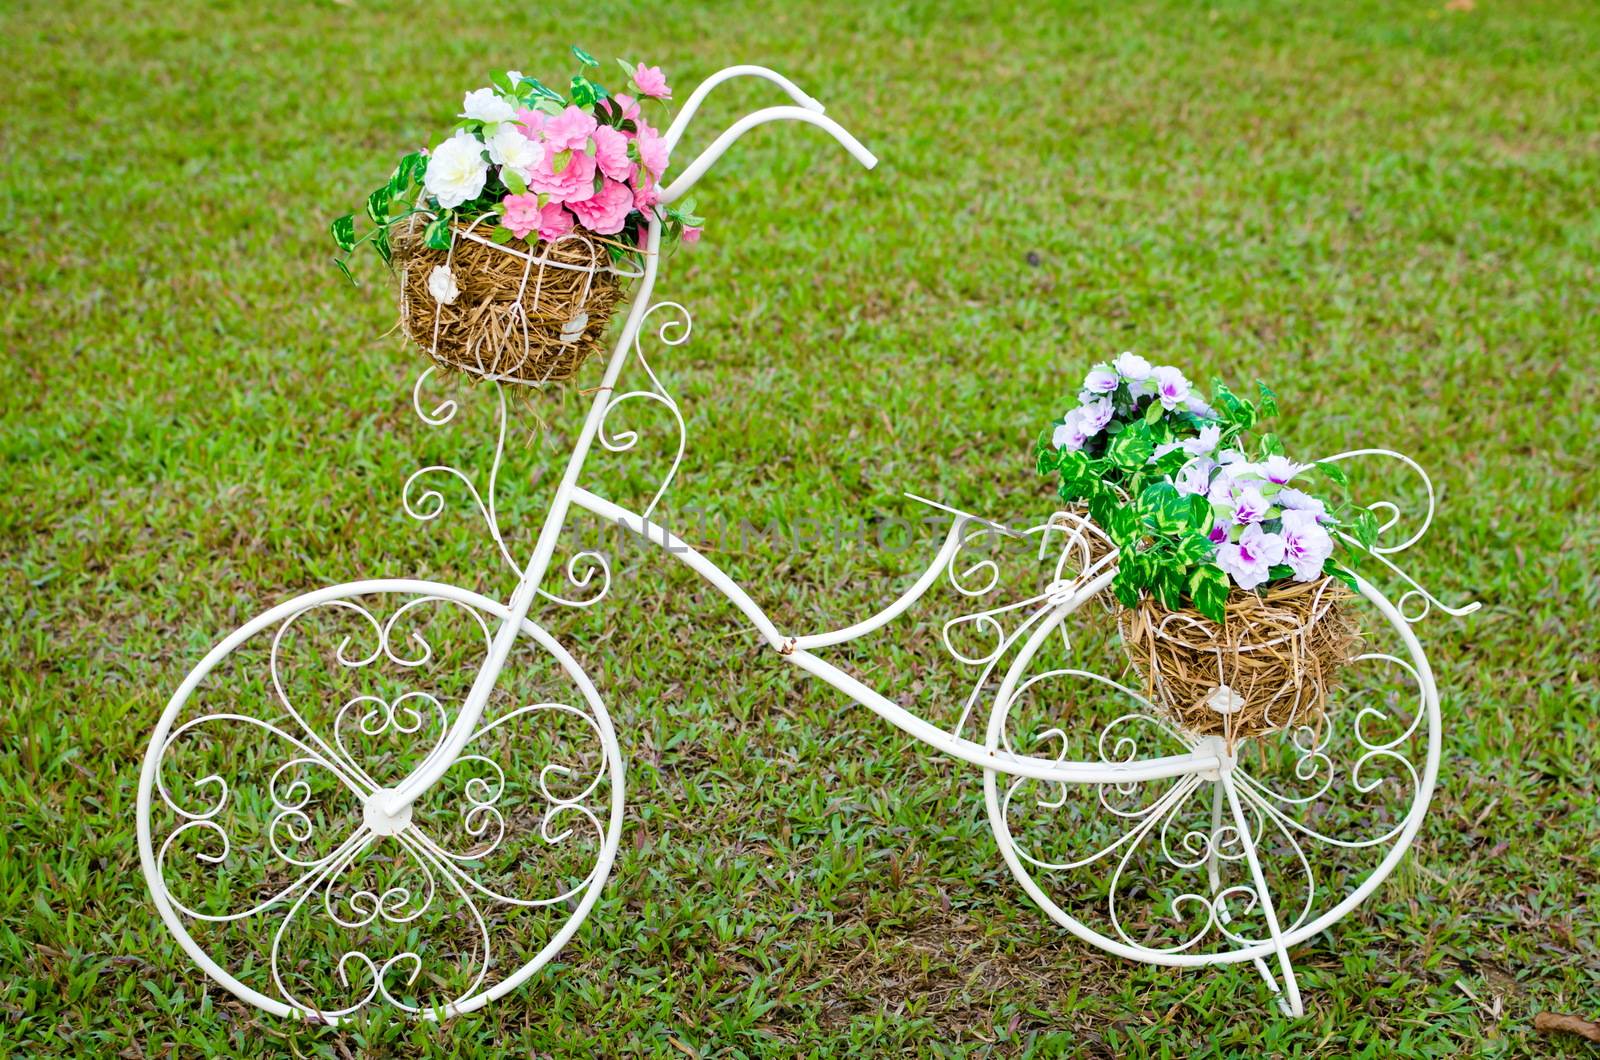 White steel bike and flower pots on the grass